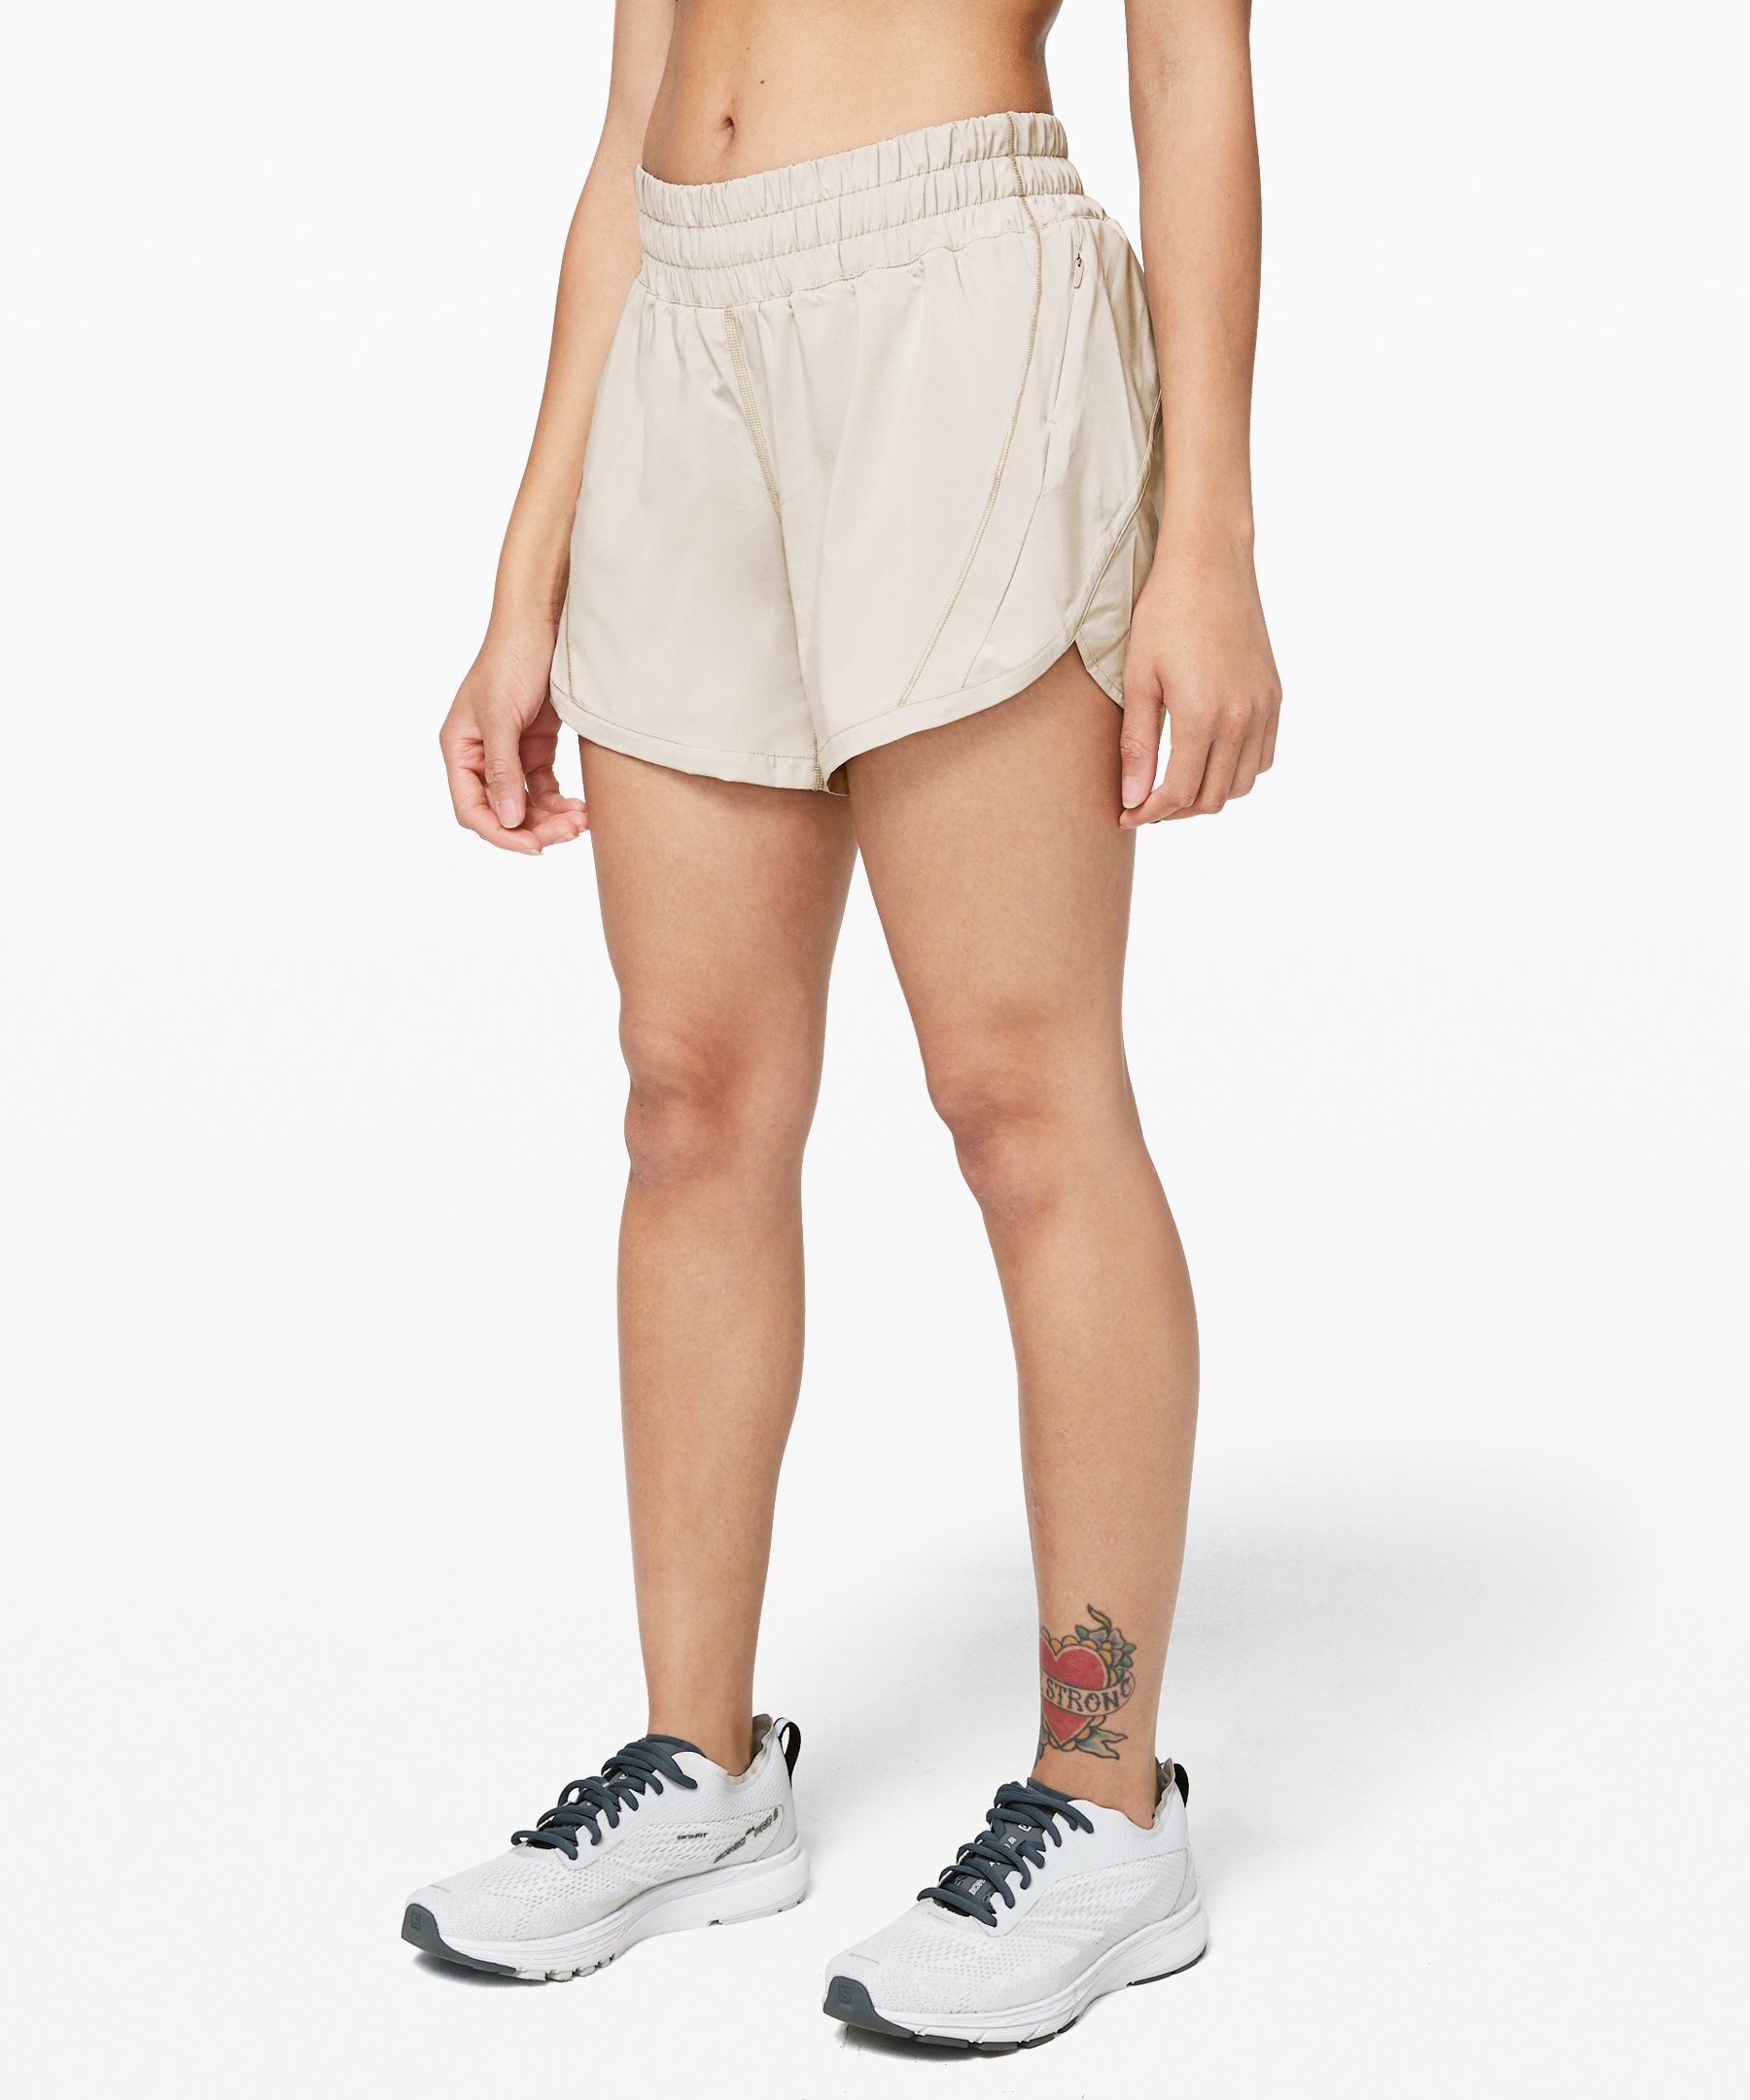 Lululemon athletica Track That Mid-Rise Lined Short 5